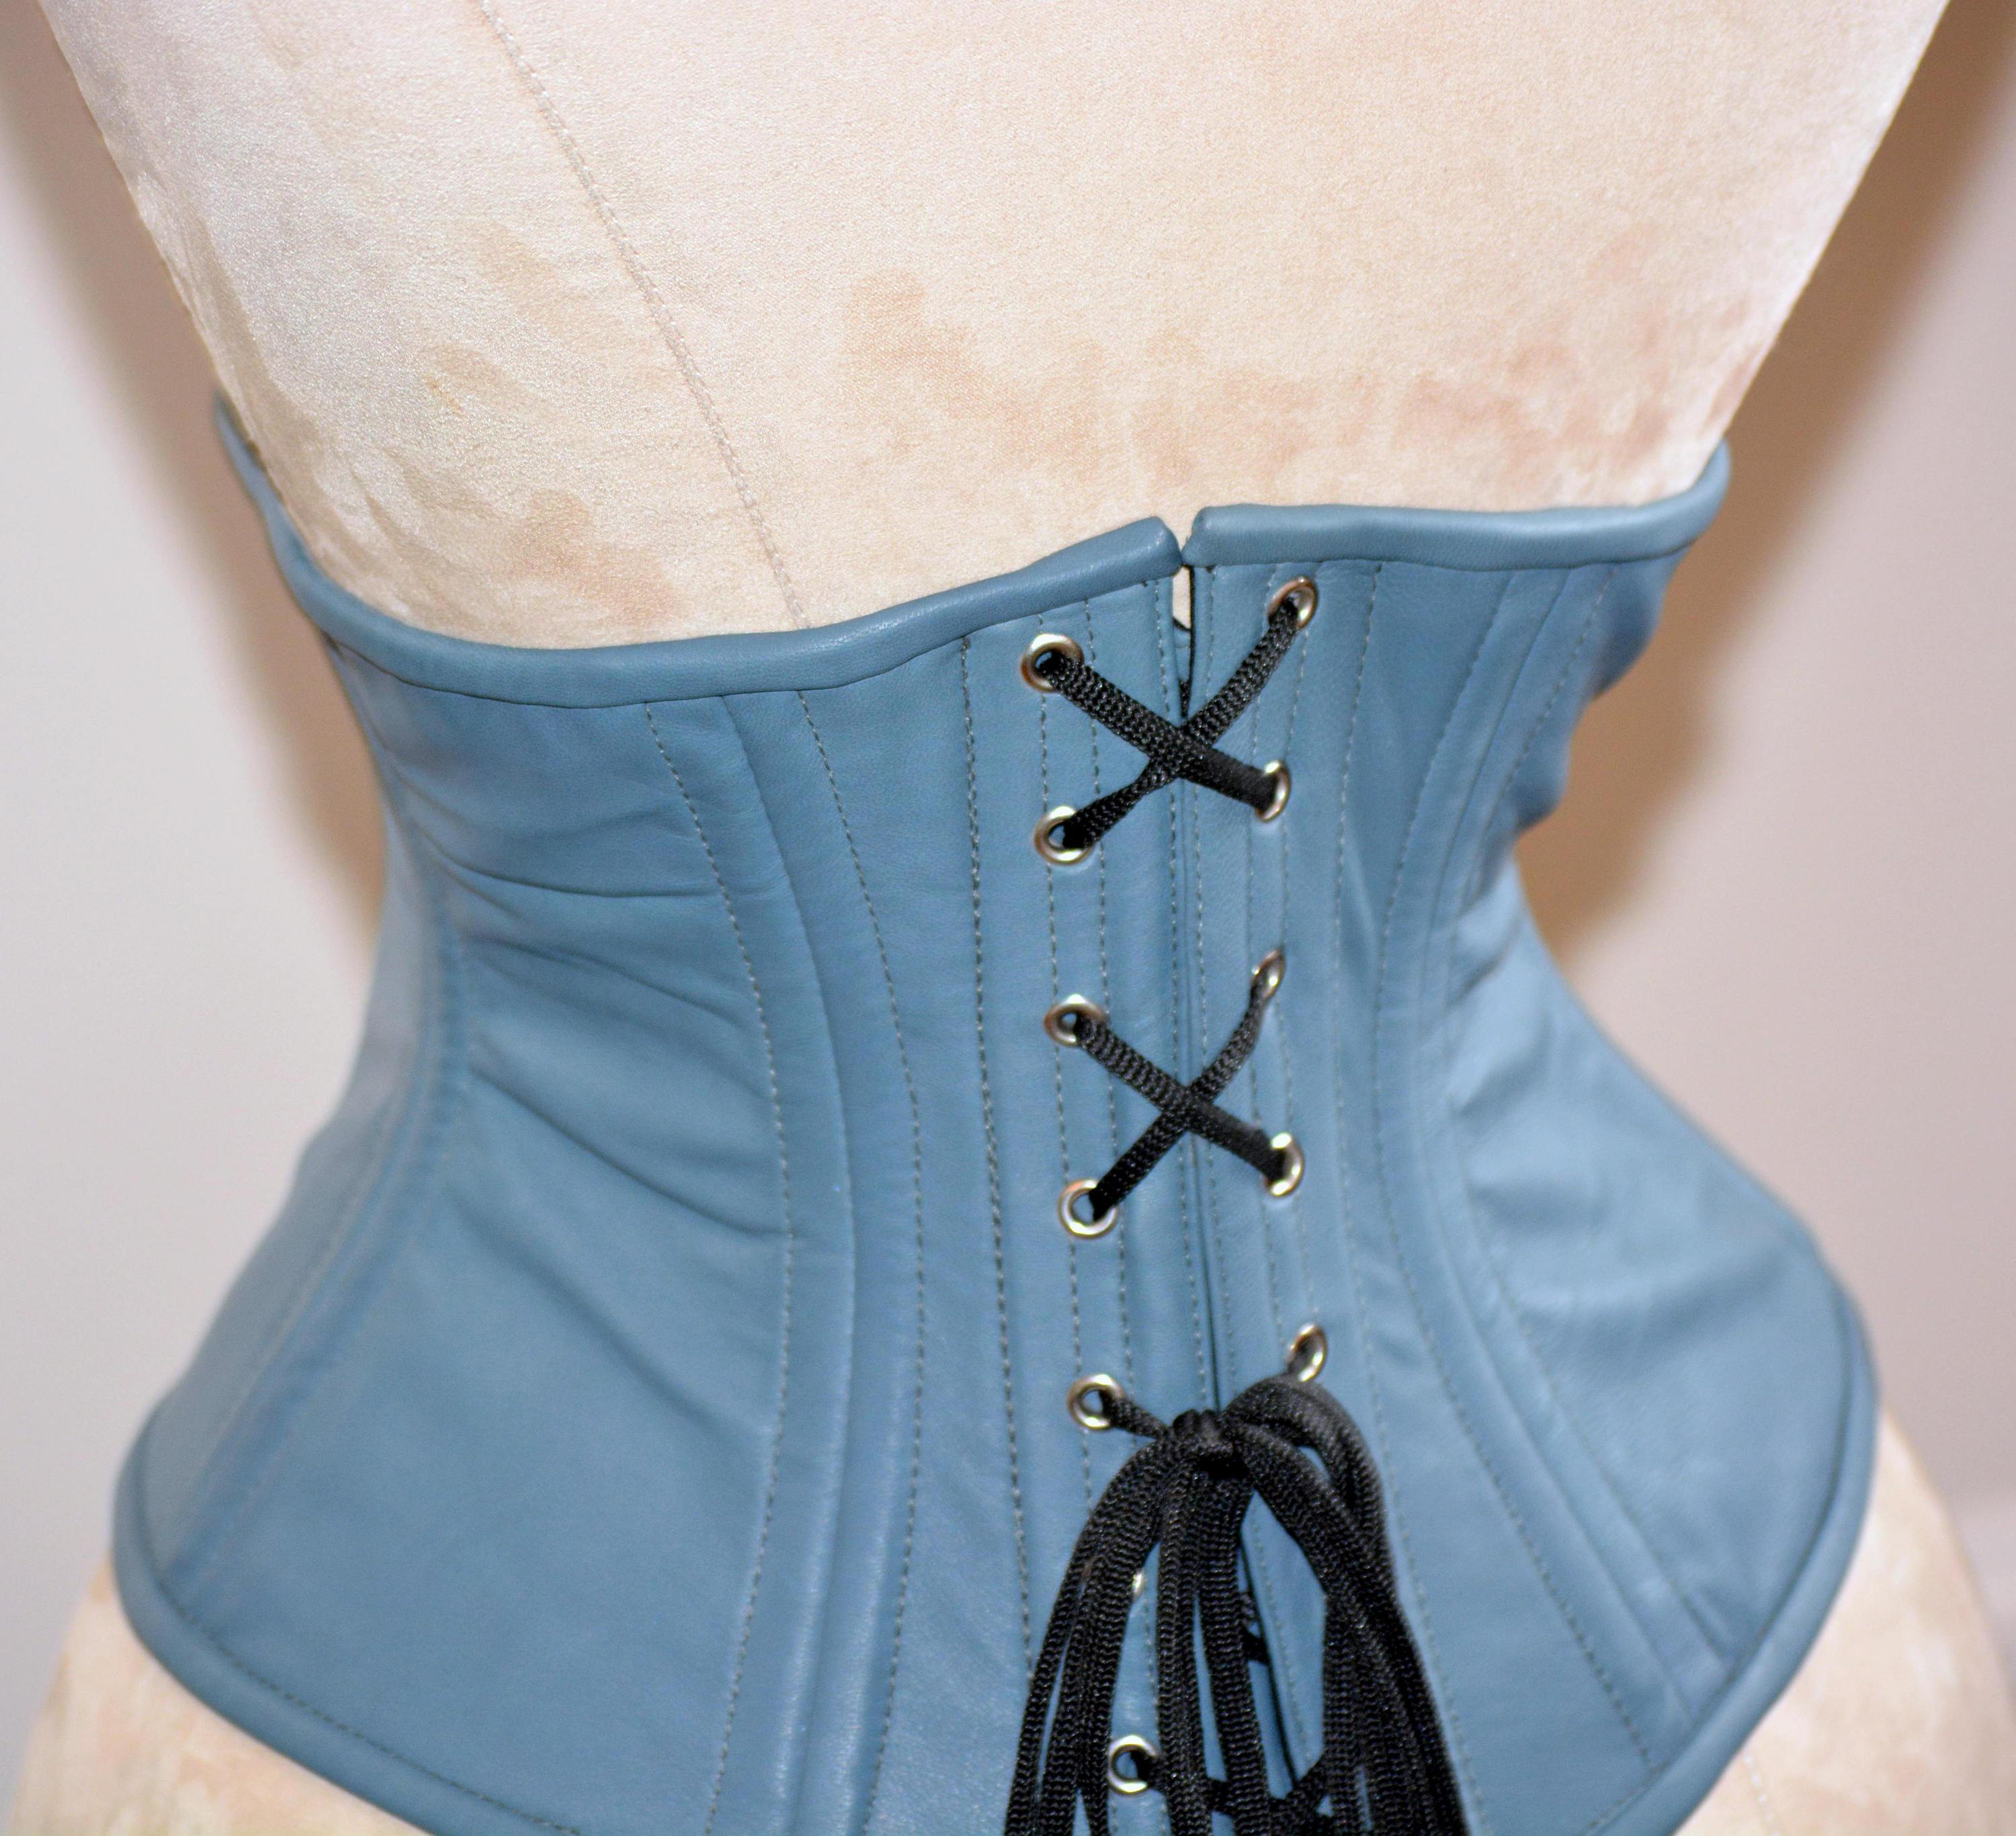 Authentic steel boned underbust corset from hand dyed real leather  (lambskin). Waist training corset for tight lacing. Trendy fashion leather  gray